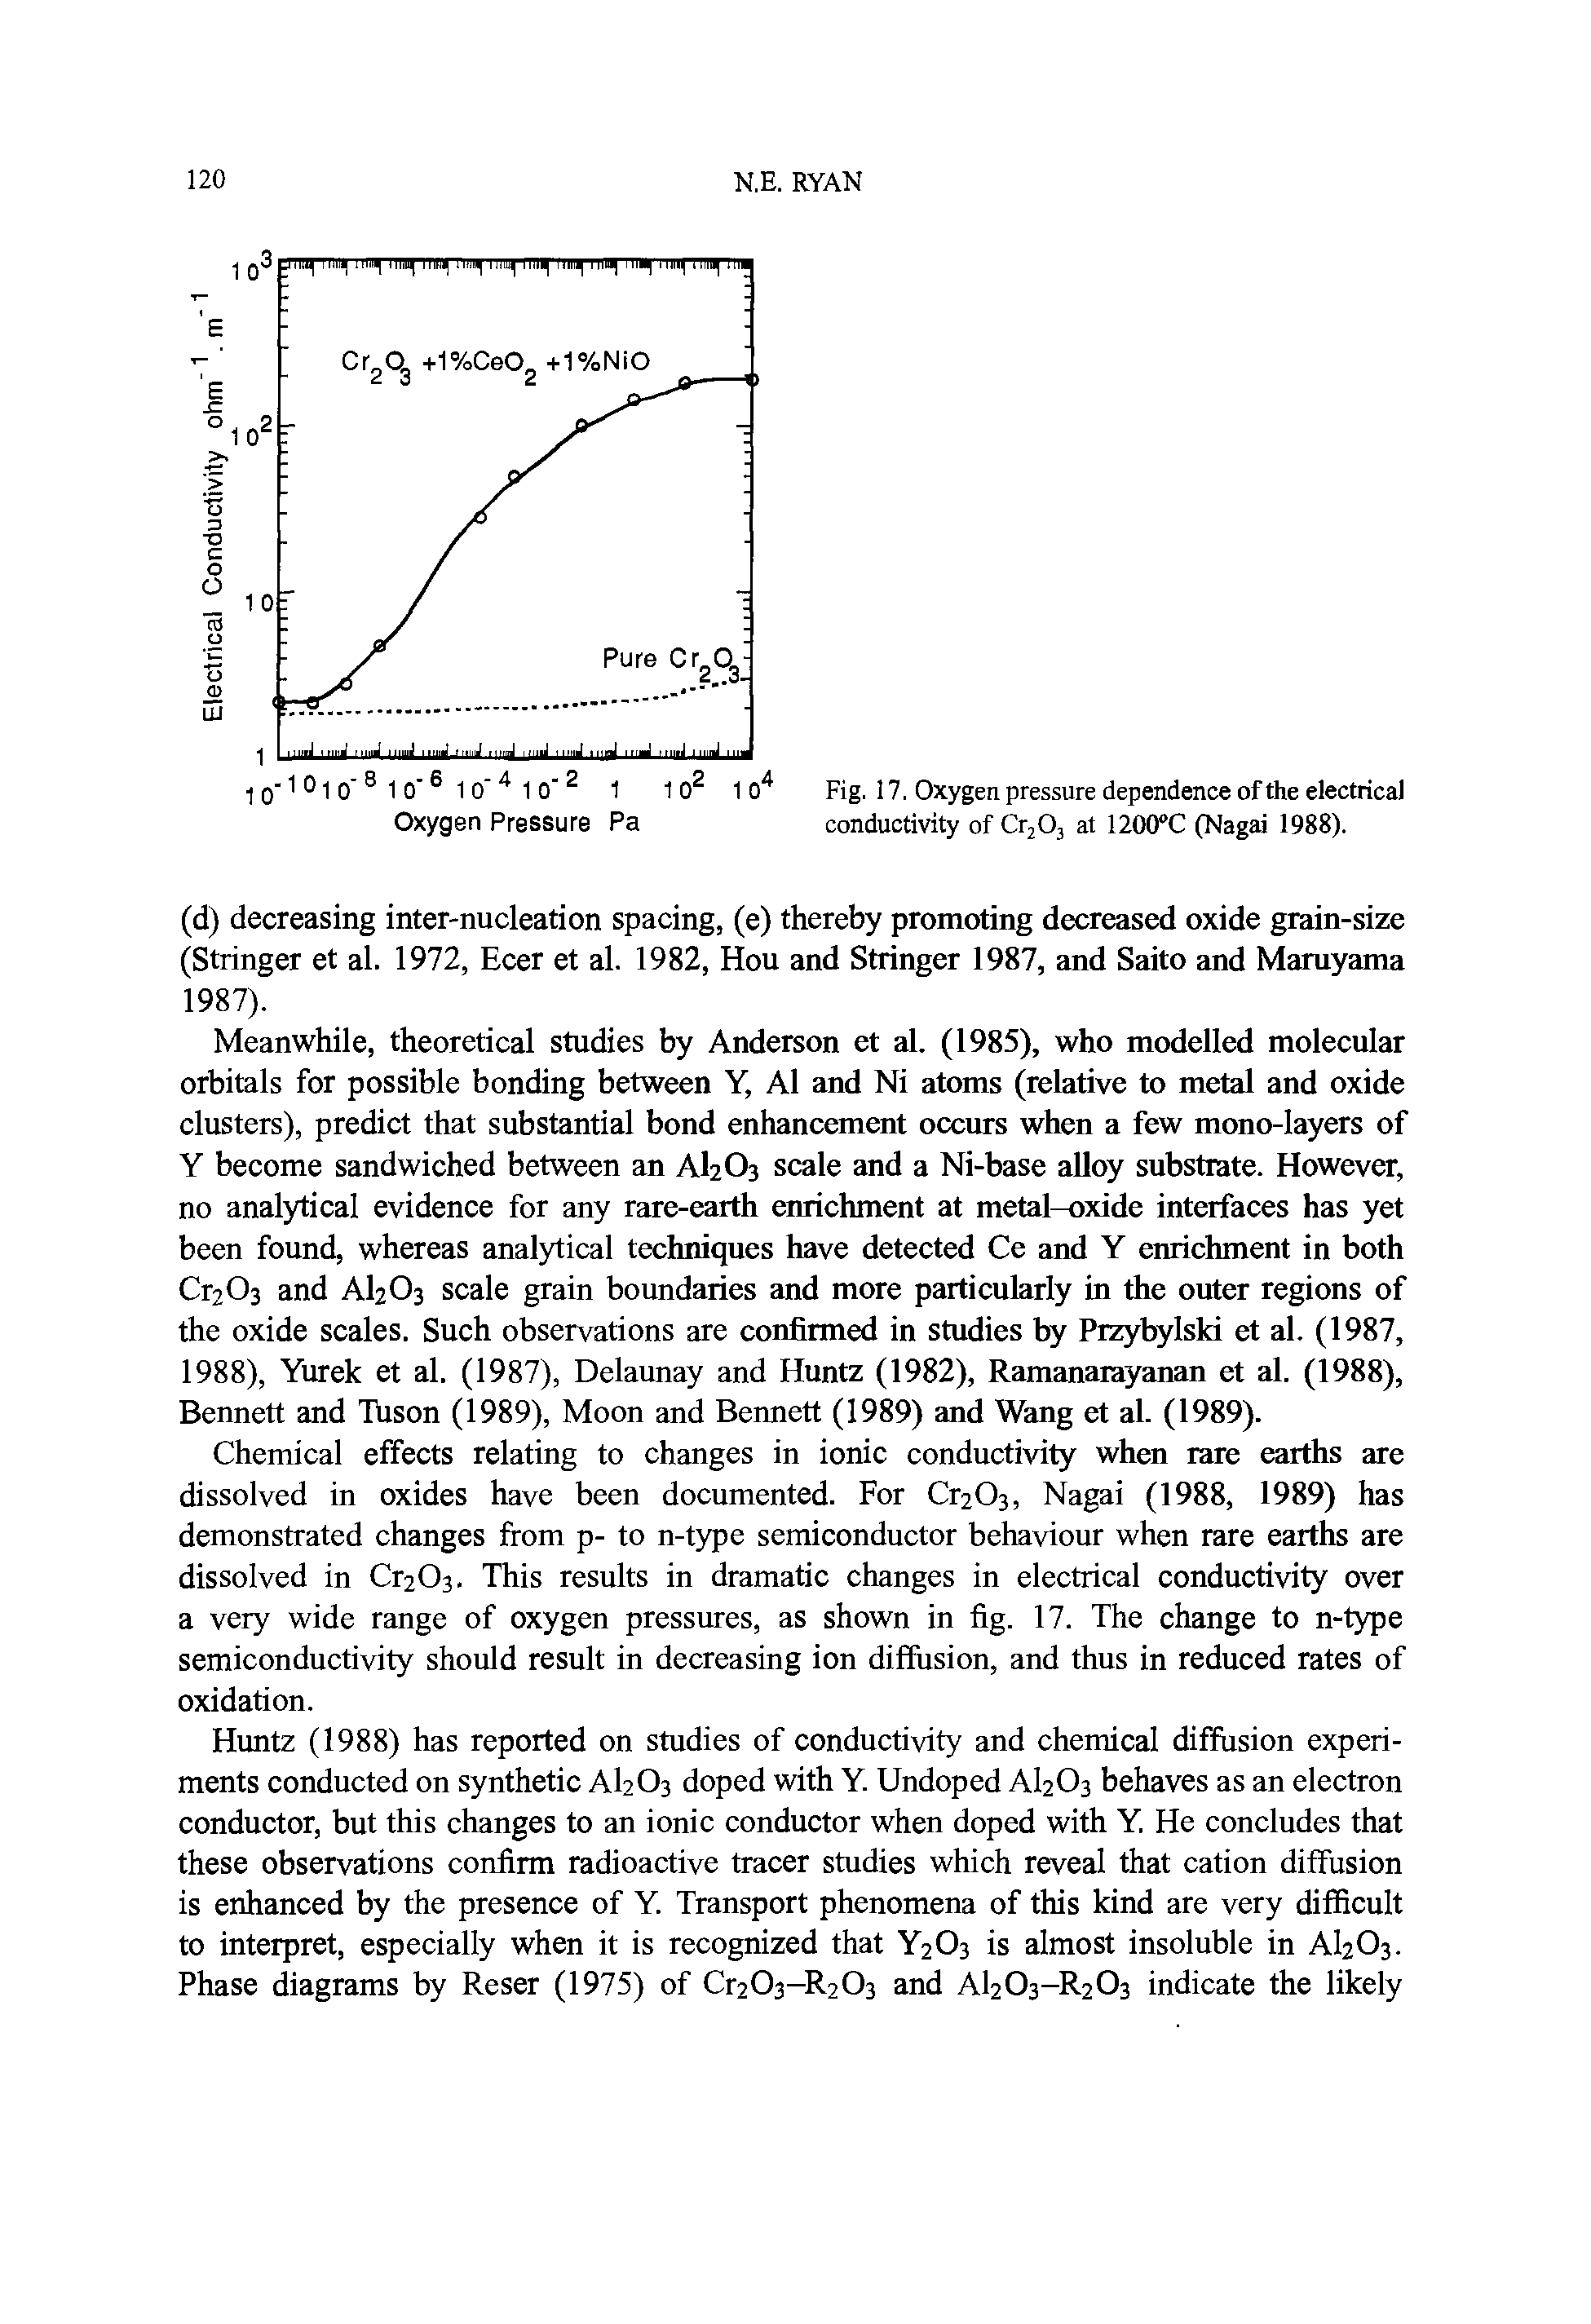 Fig. 17. Oxygen pressure dependence of the electrical conductivity of CtjOj at 1200"C (Nagai 1988).